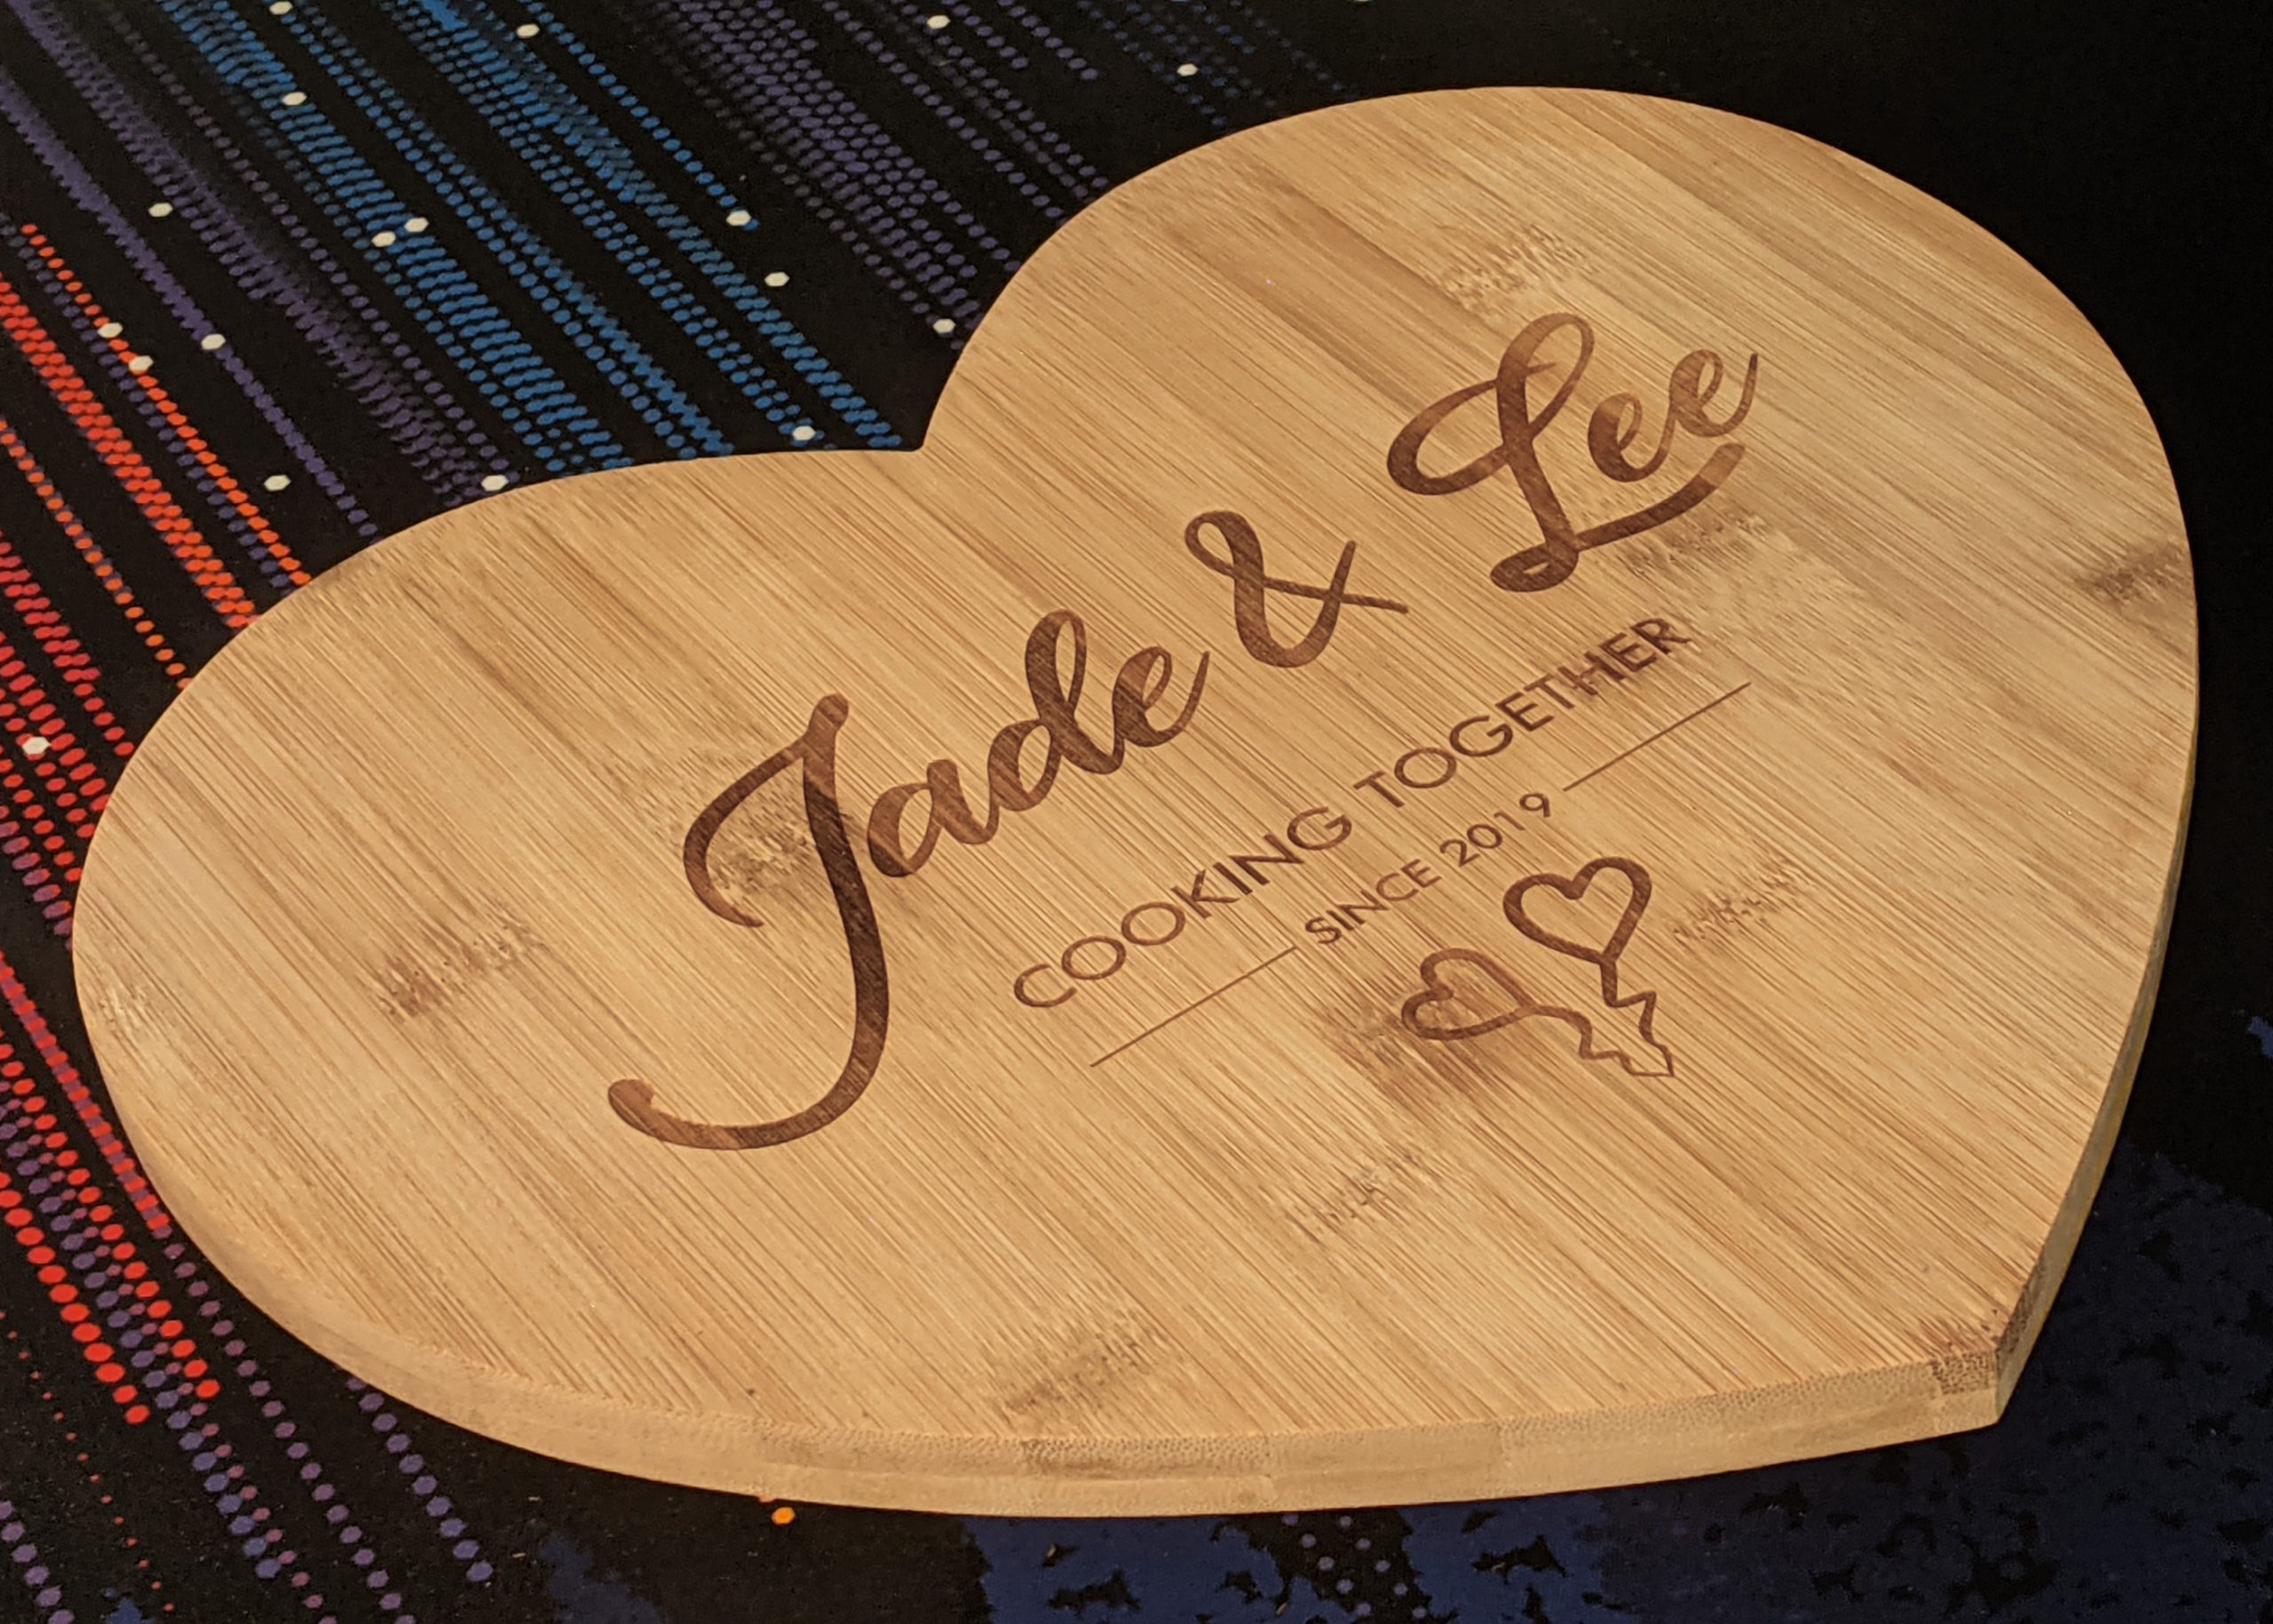 Personalised heart bamboo cutting board featuring Jade and Lee's culinary journey since 2019 with two charming love hearts.